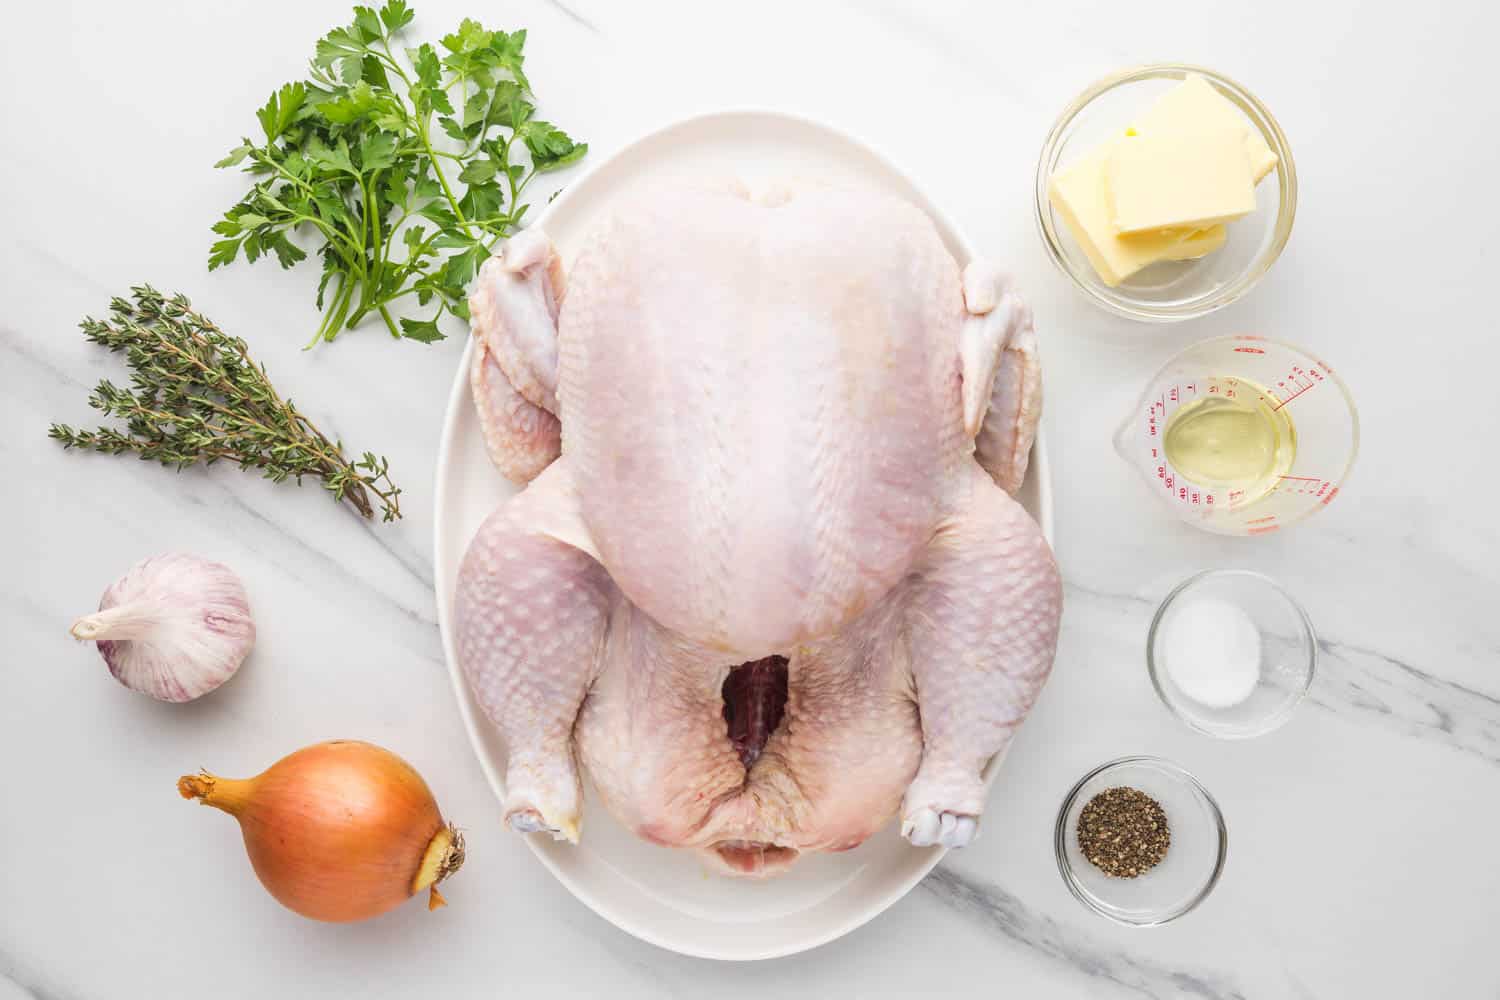 Ingredients needed to make a garlic herb butter roast chicken including one large raw chicken, onion, garlic, butter, salt, pepper, thyme, parsley, and olive oil.